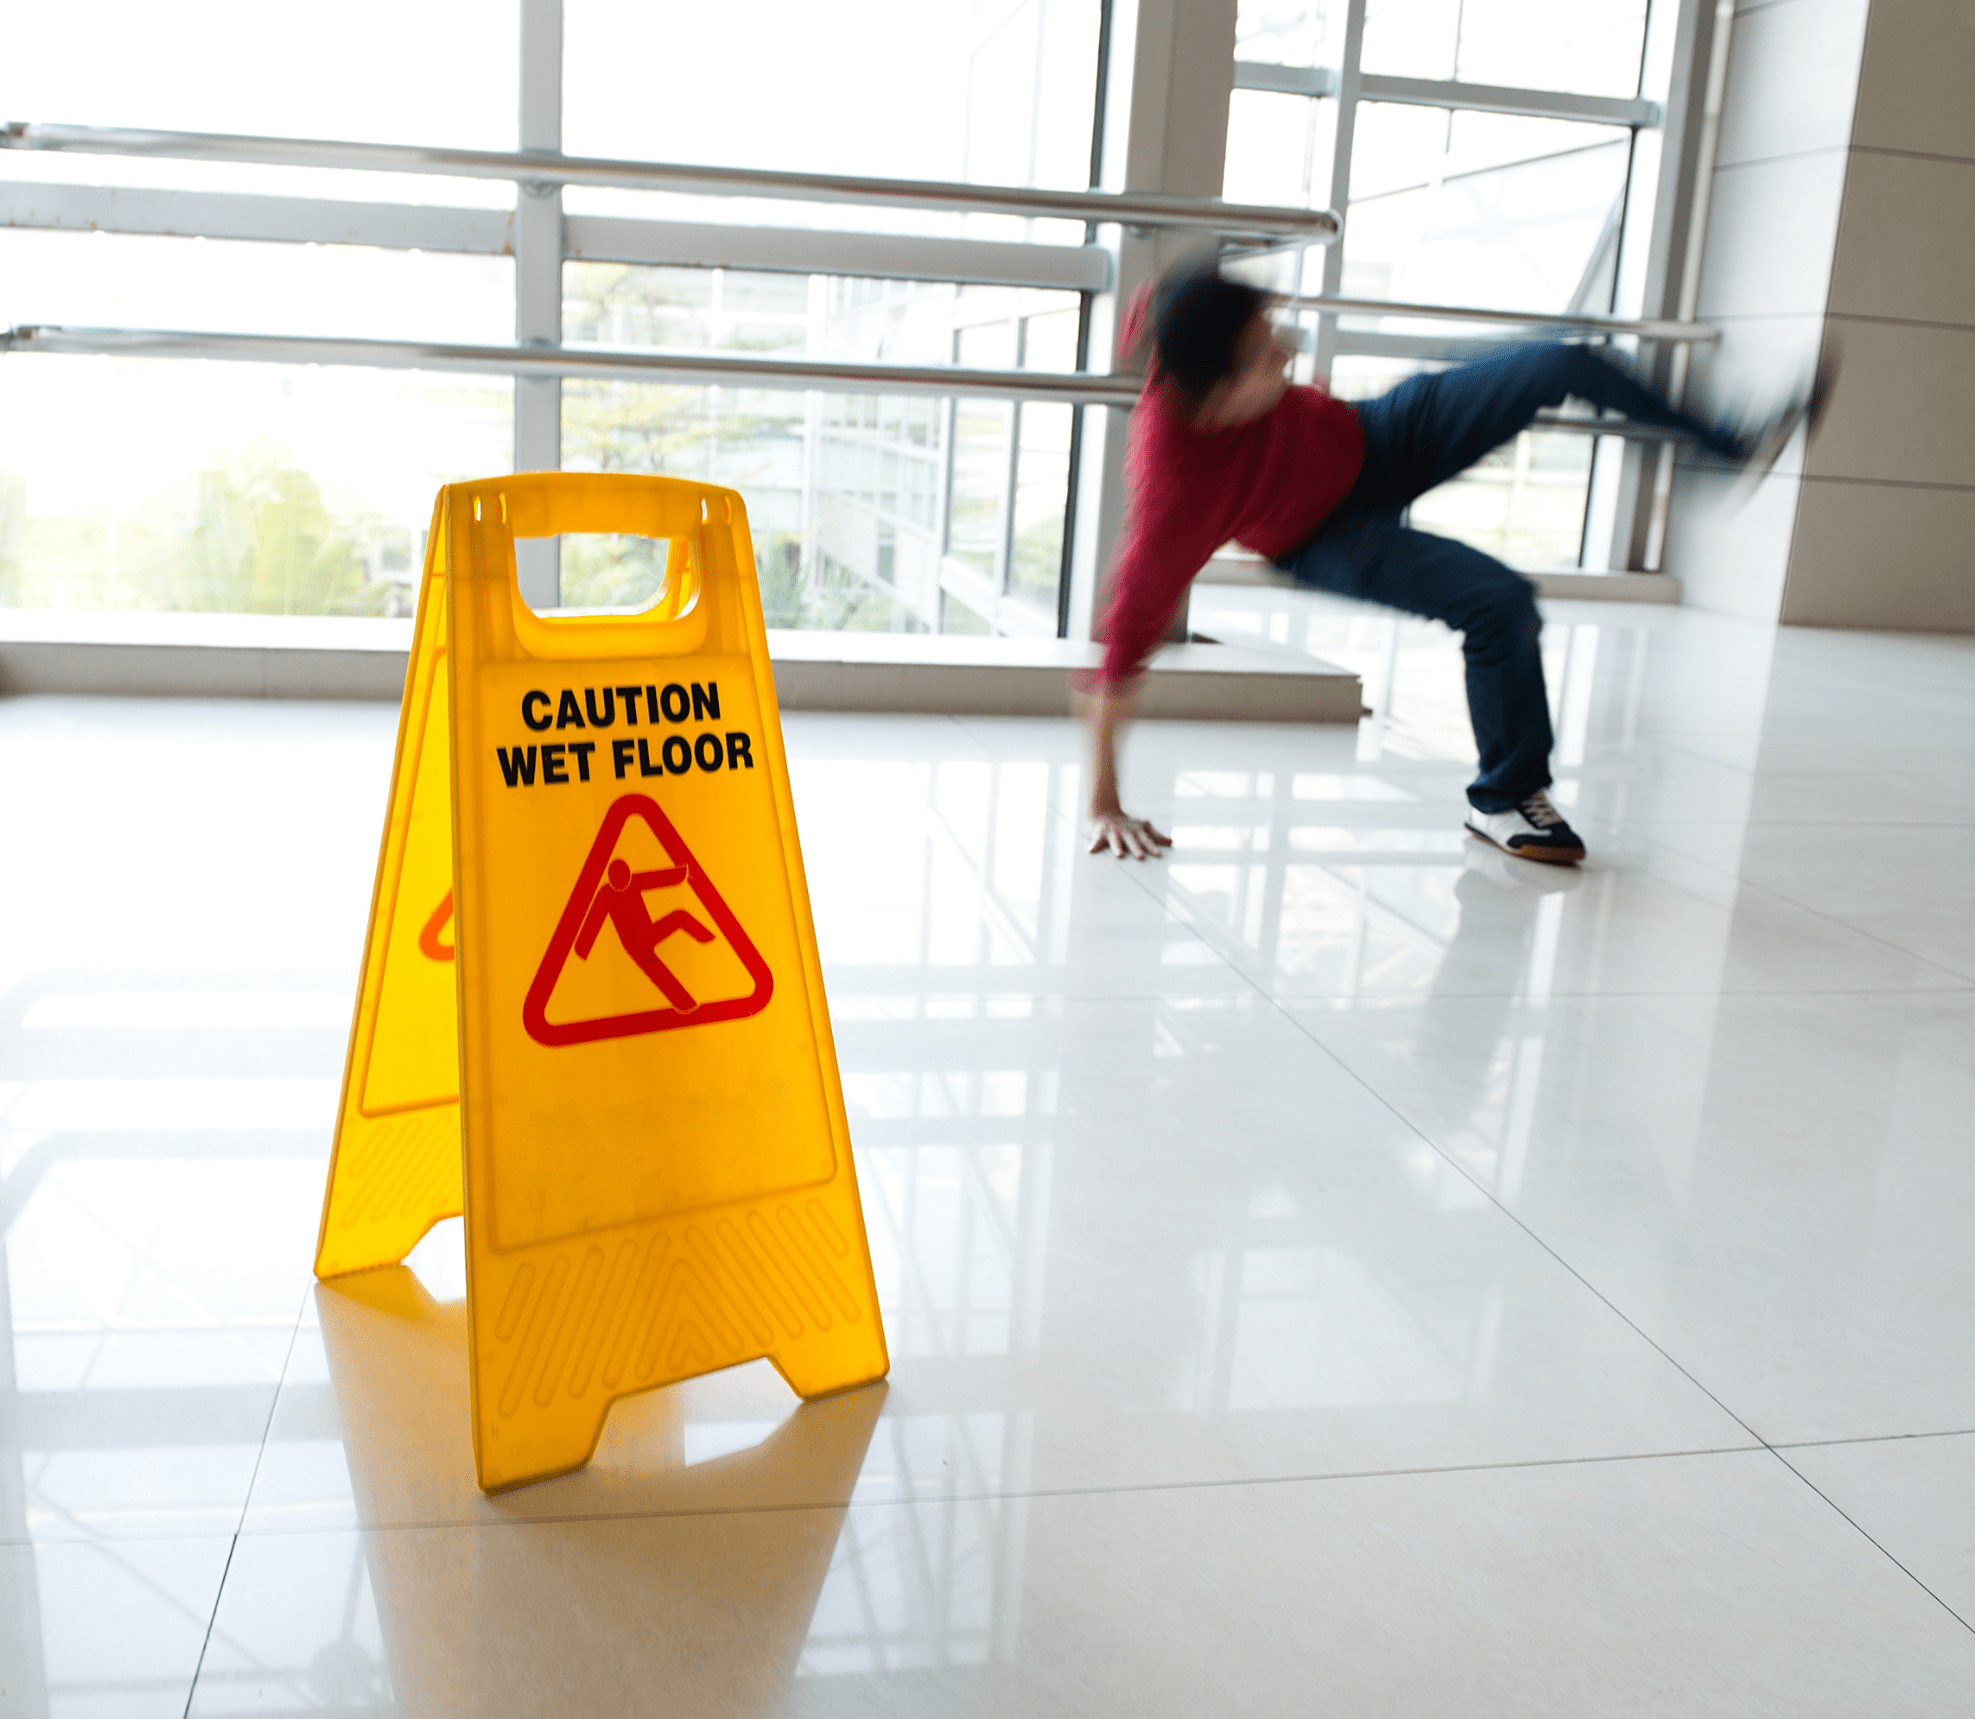 Hospitality Excerpt Snooze Slip and Fall Accident: who pays for my medical bills?